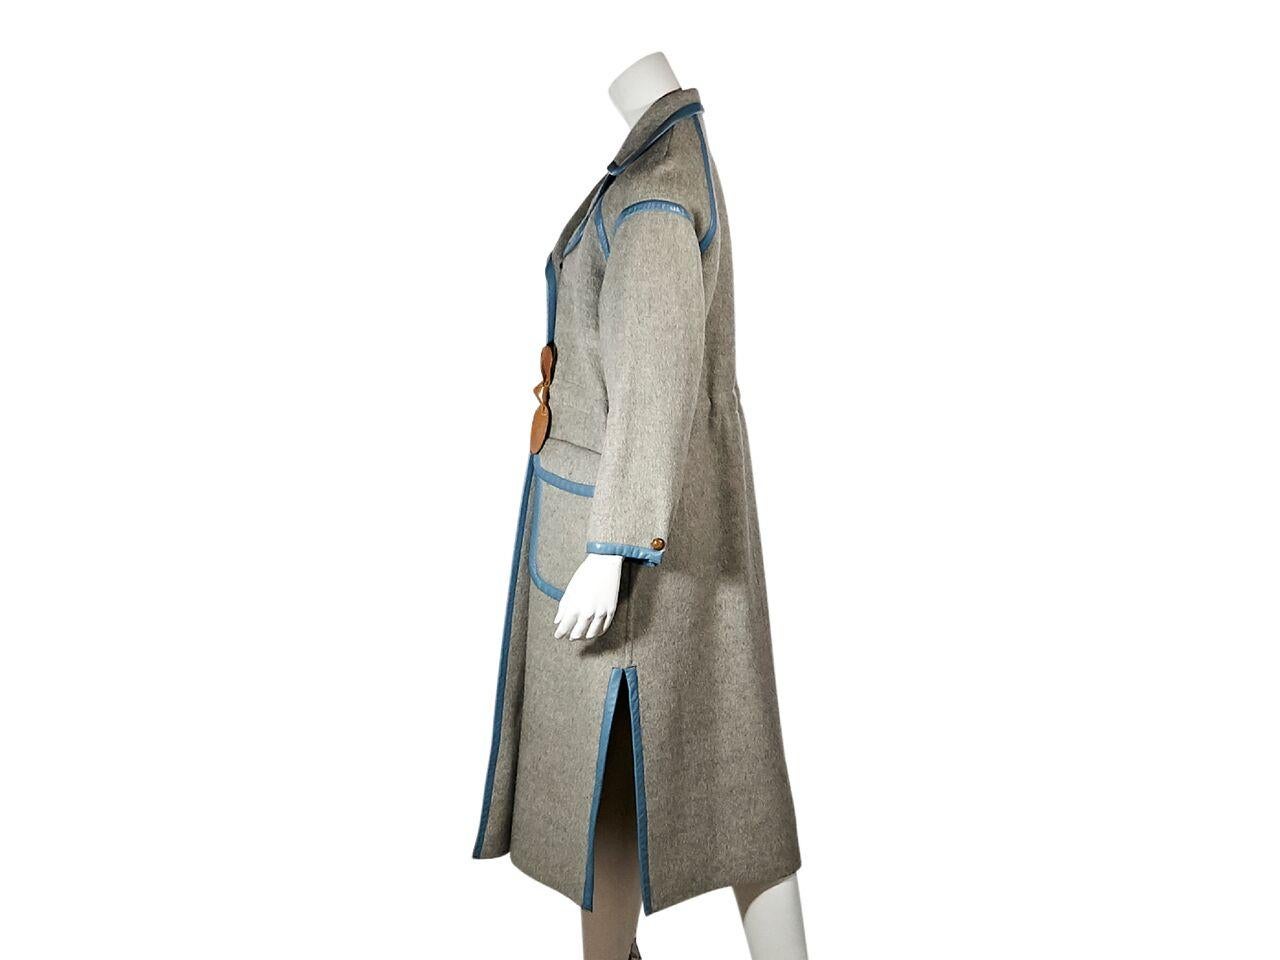 Product details:  Vintage grey wool coat by Courreges.  Trimmed with blue leather.  Rounded notched lapel.  Long sleeves.  Double-breasted button front.  Drawstring waist with bow ends.  Waist flap pockets.  Side hem slits.  43